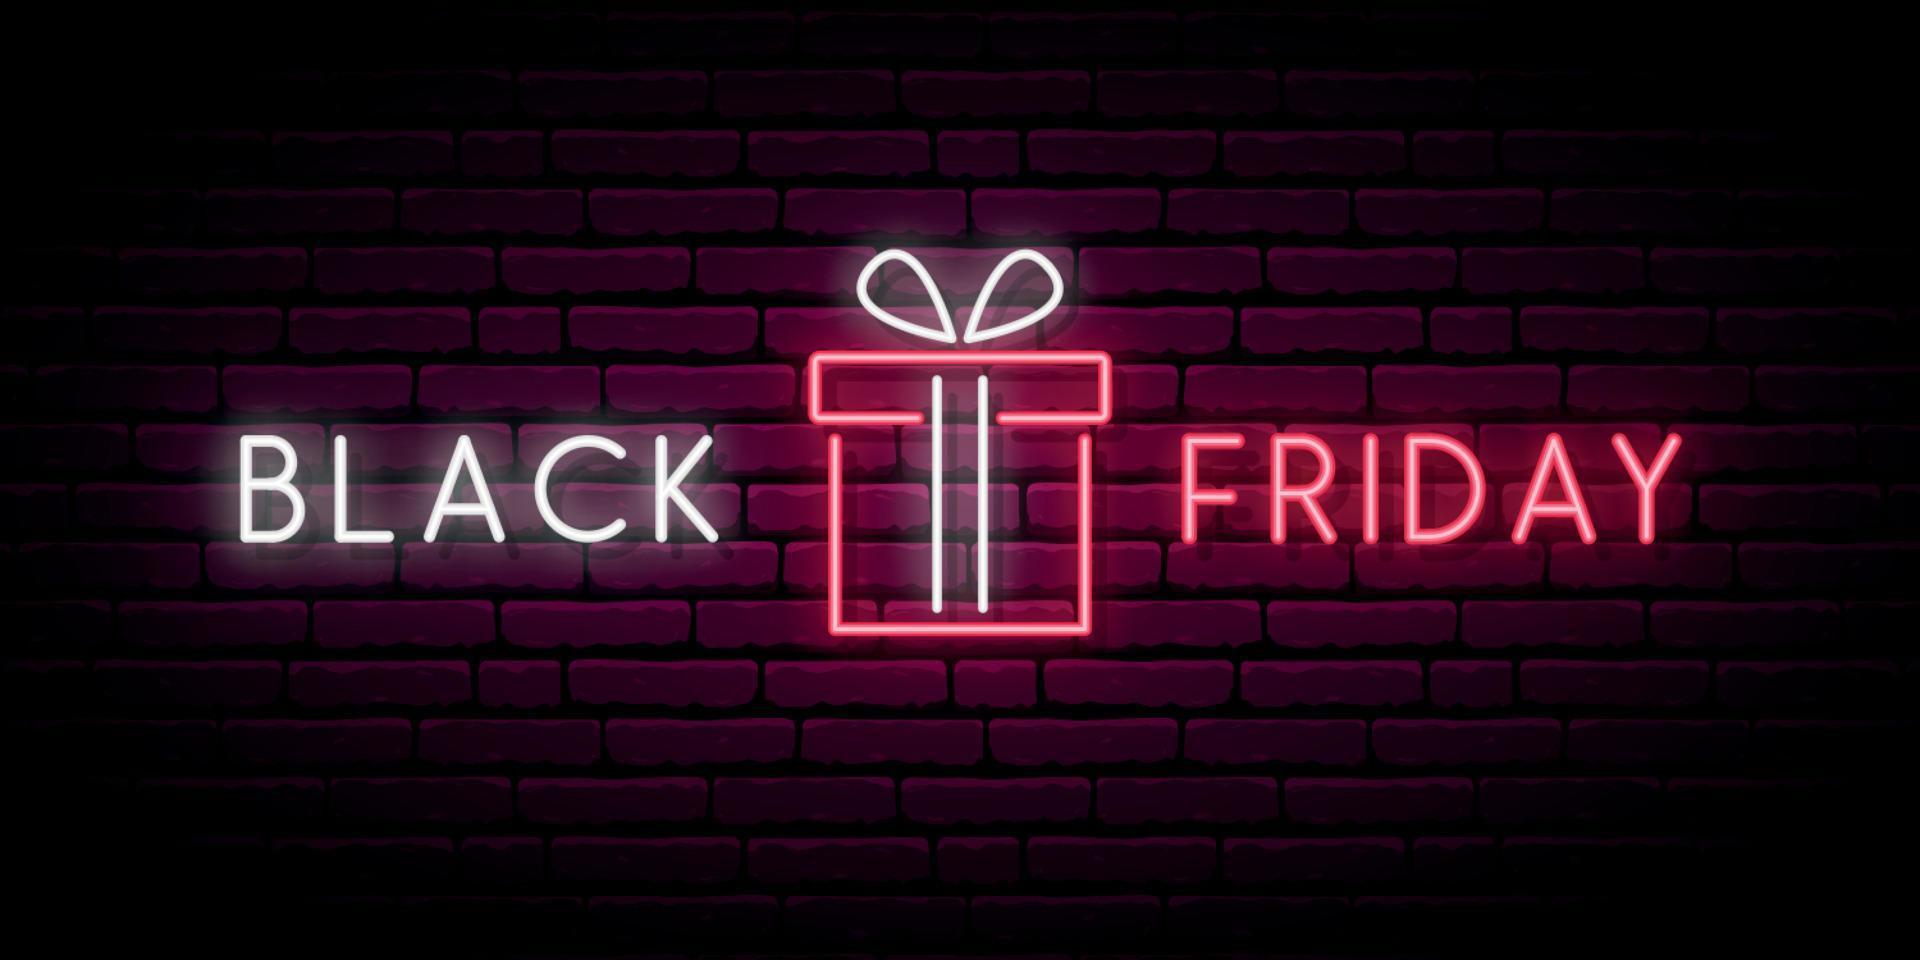 1699530757_0_neon-black-friday-signboard-sale-banner-with-glowing-neon-text-and-an-gift-box-vector.jpg